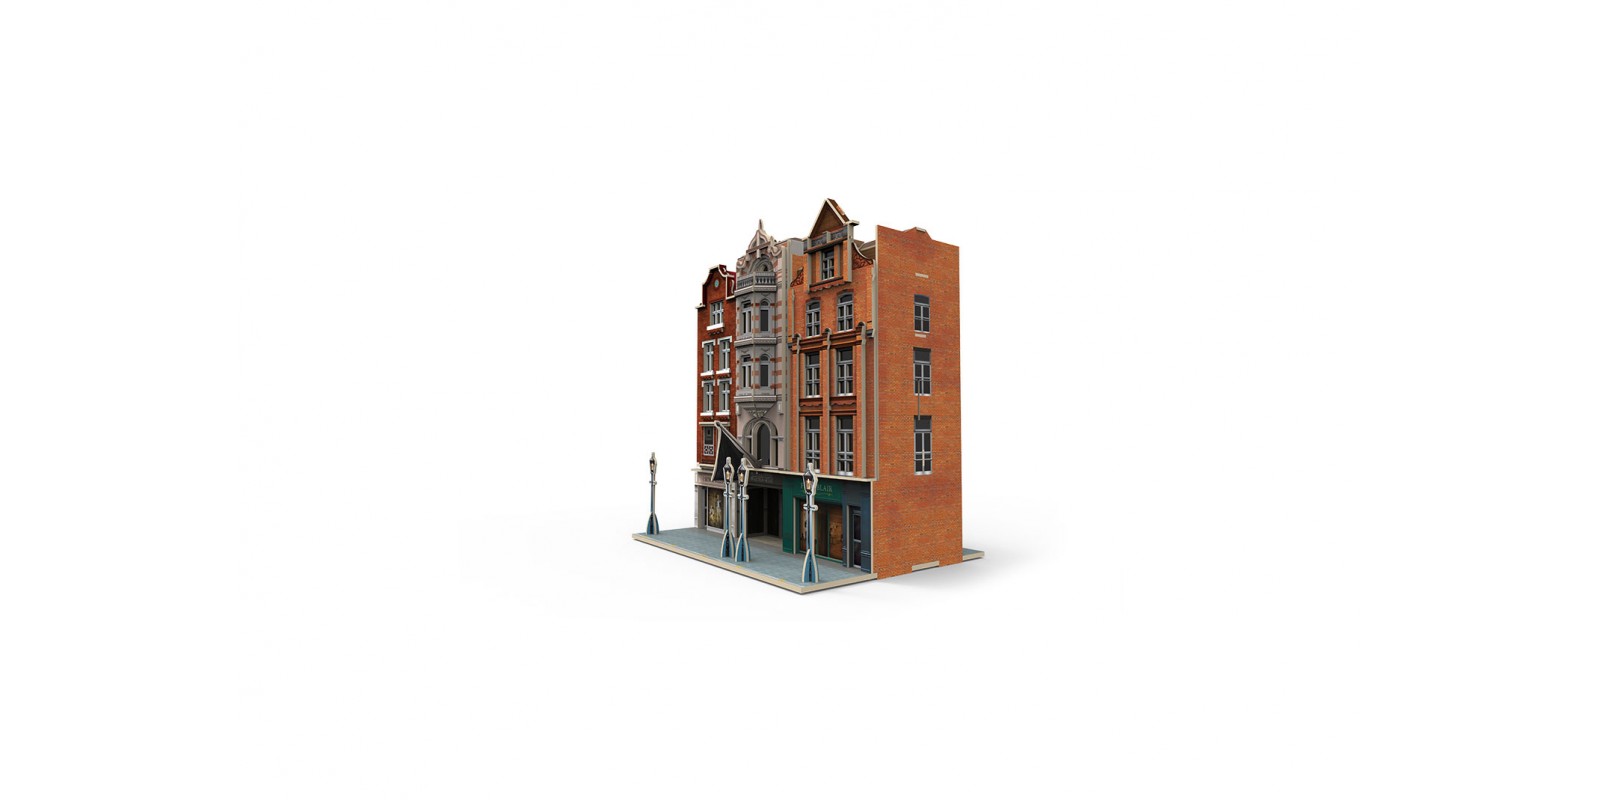 72784 Märklin Start up - "Residential and Commercial Buildings" 3D Building Puzzle